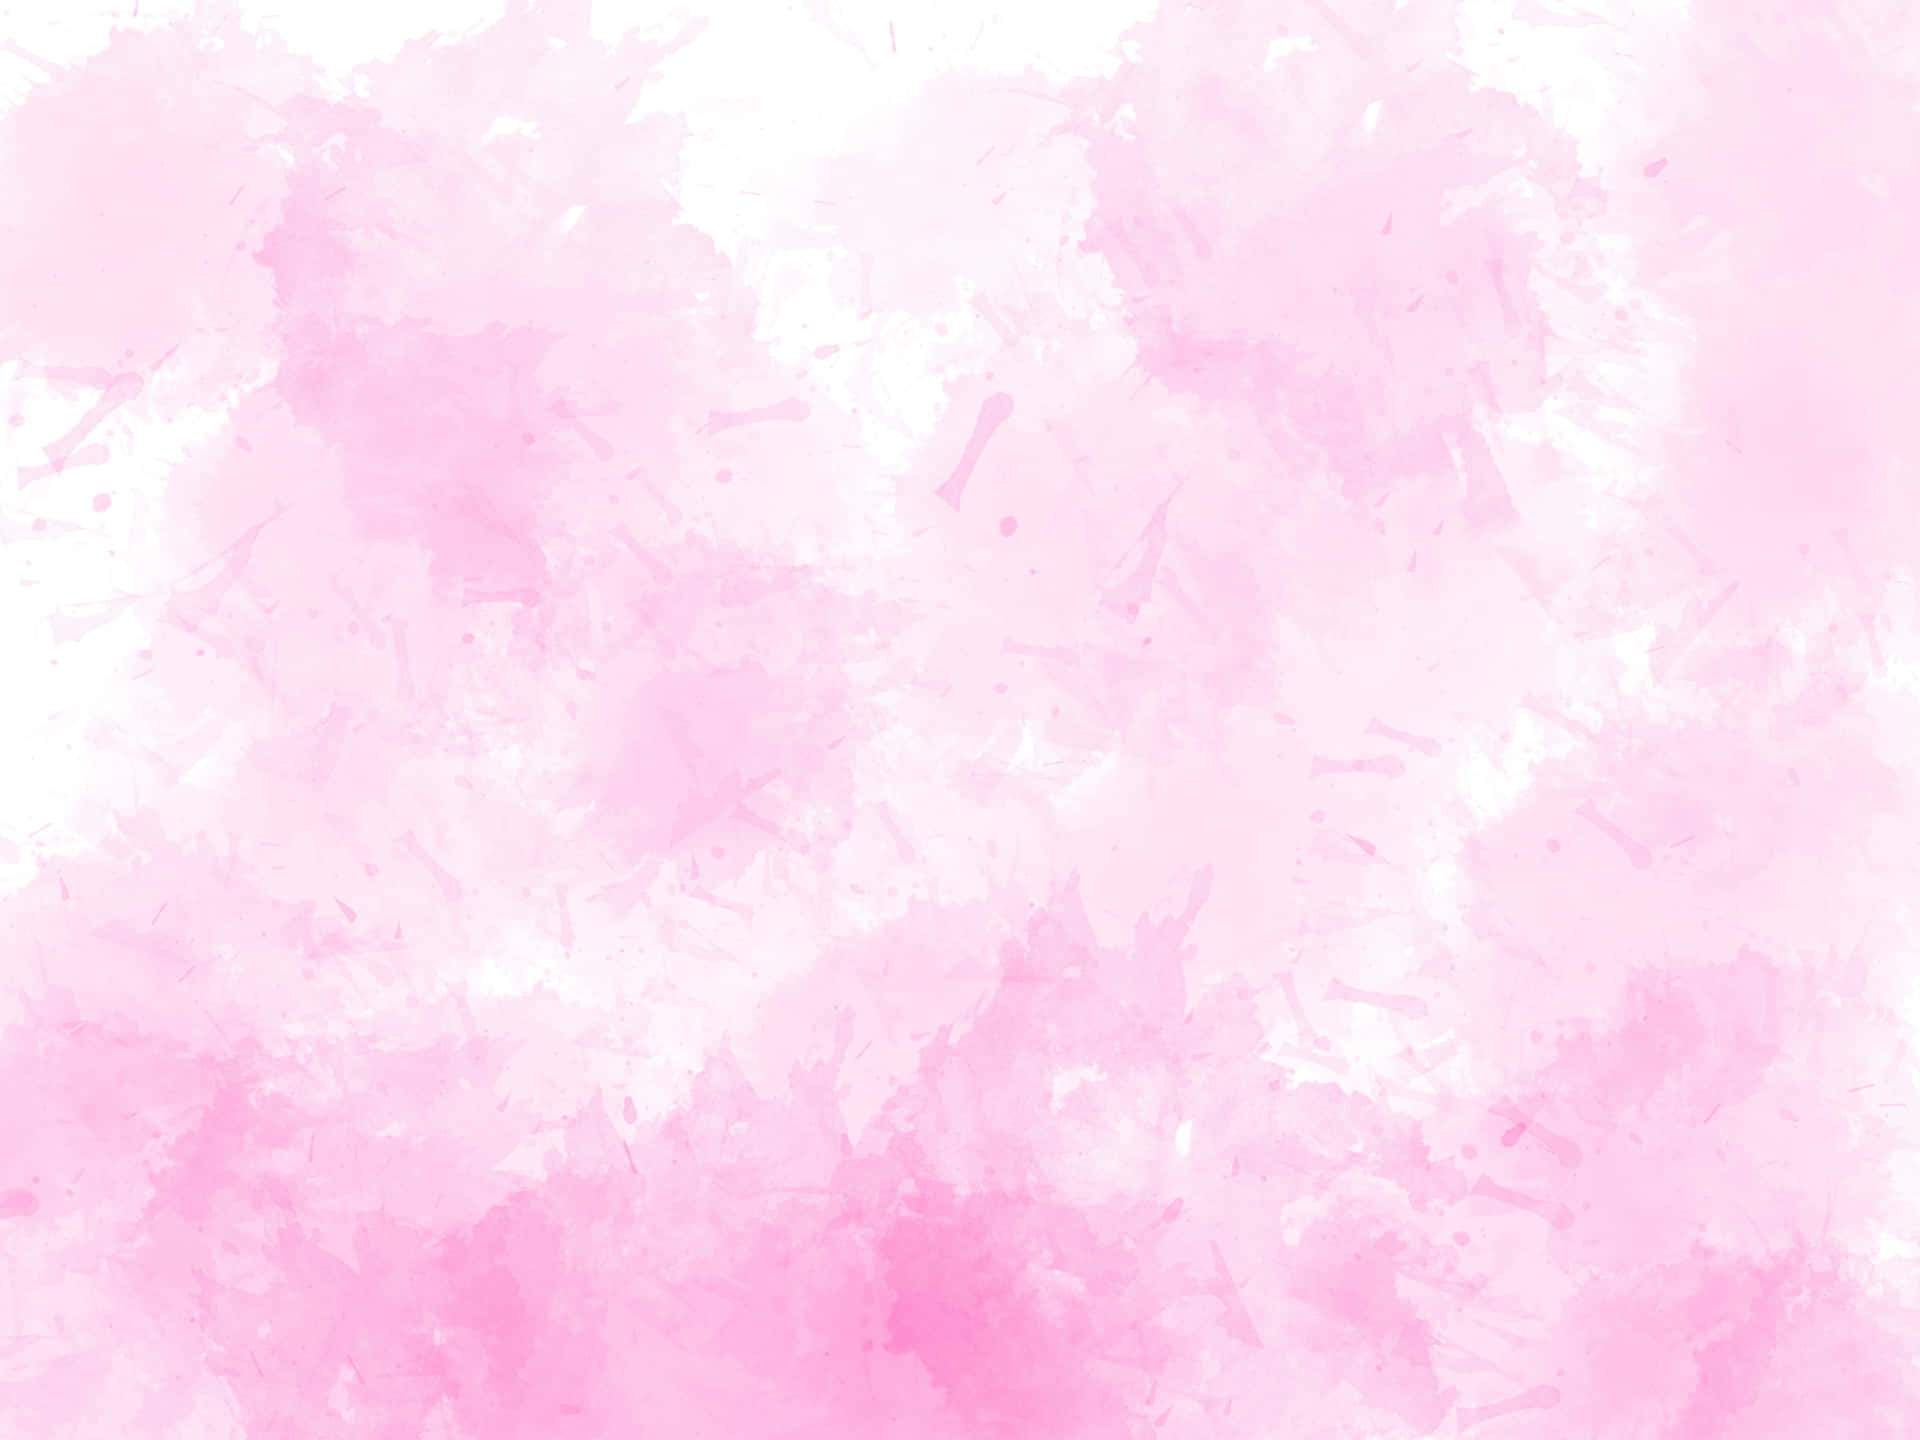 Aesthetic Pink Watercolor Background